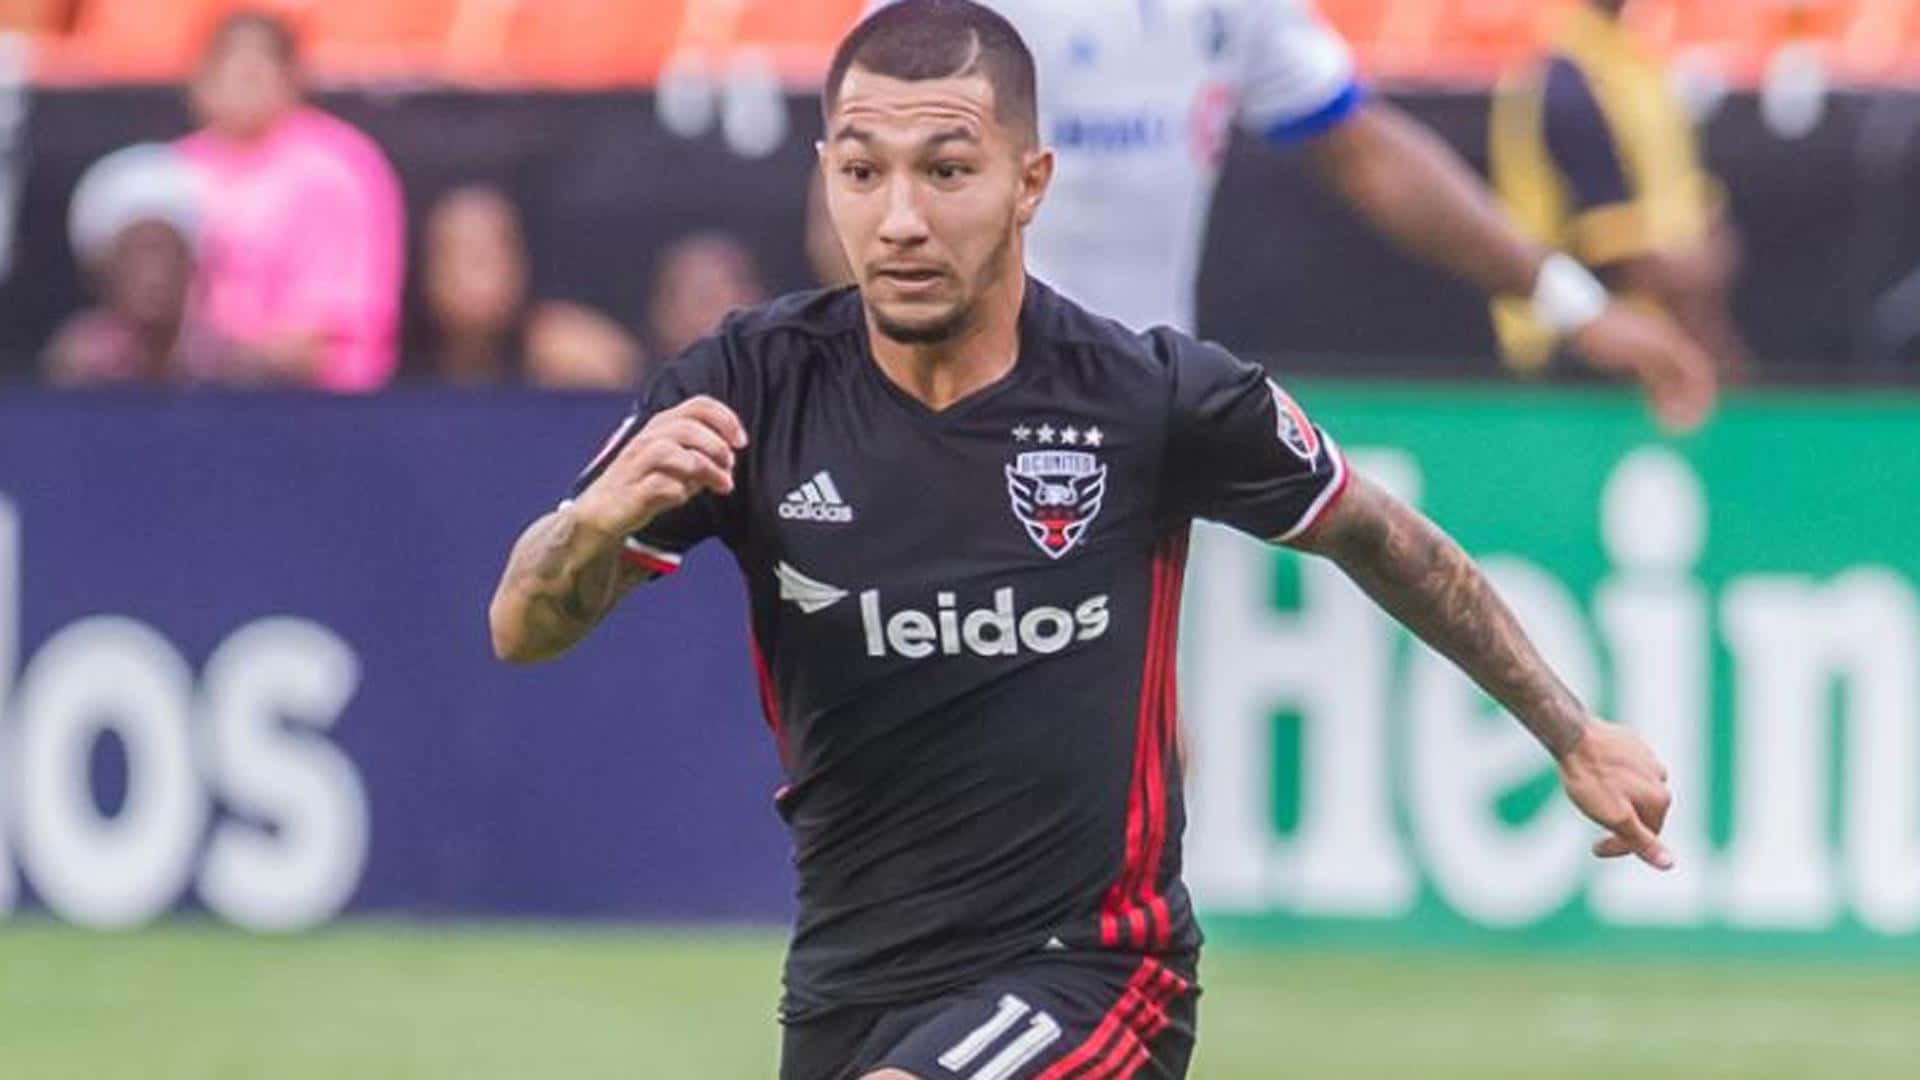 Luciano Acosta D.C. United Leidos Jersey Tapet Wallpaper